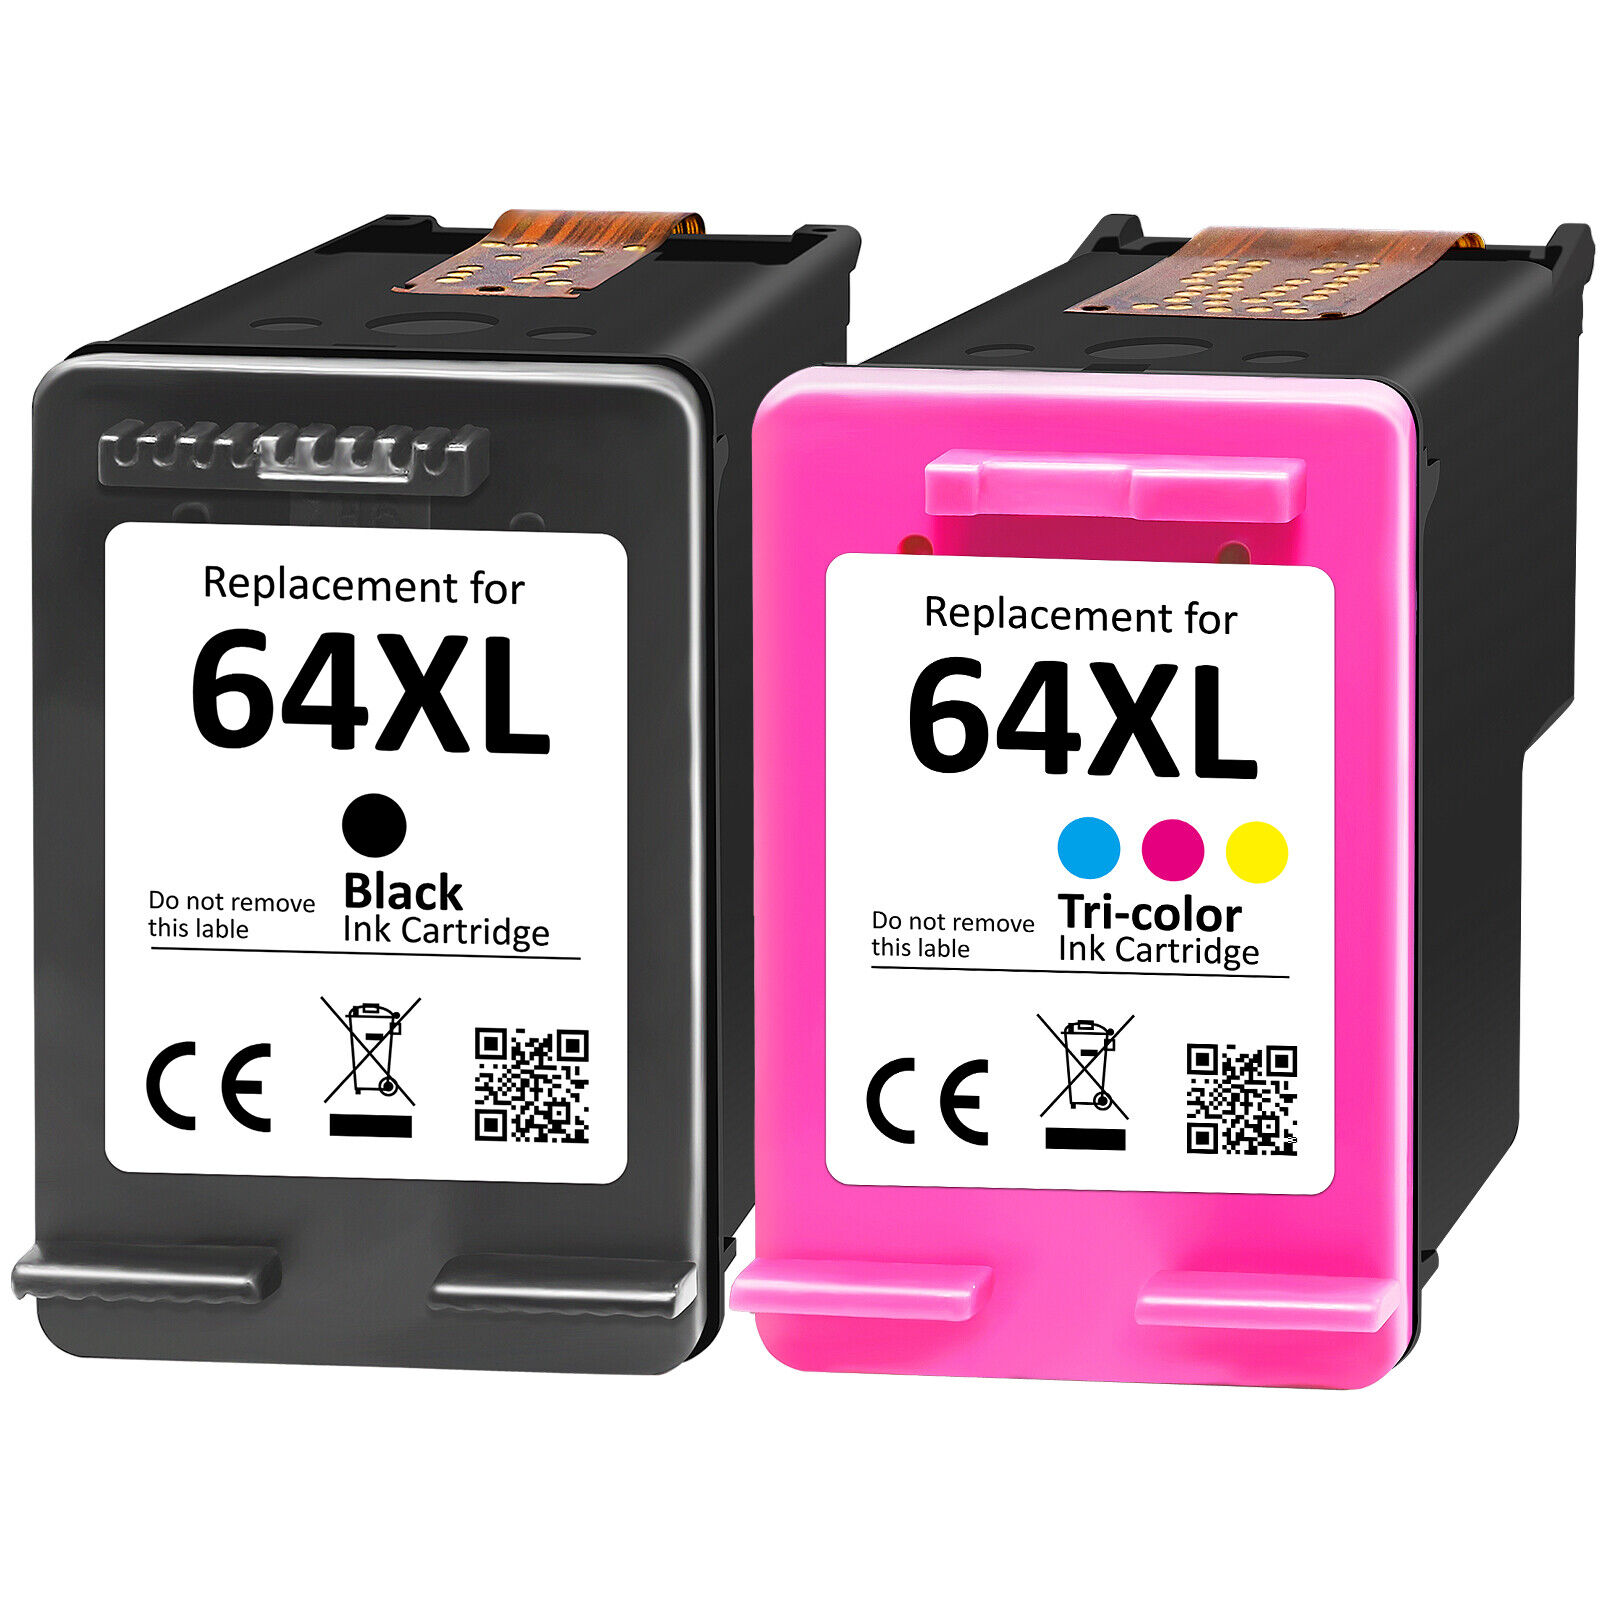 64XL Ink Cartridge for HP ENVY Photo 7855 7155 7858 6255 7800 7164 6255 6220 lot